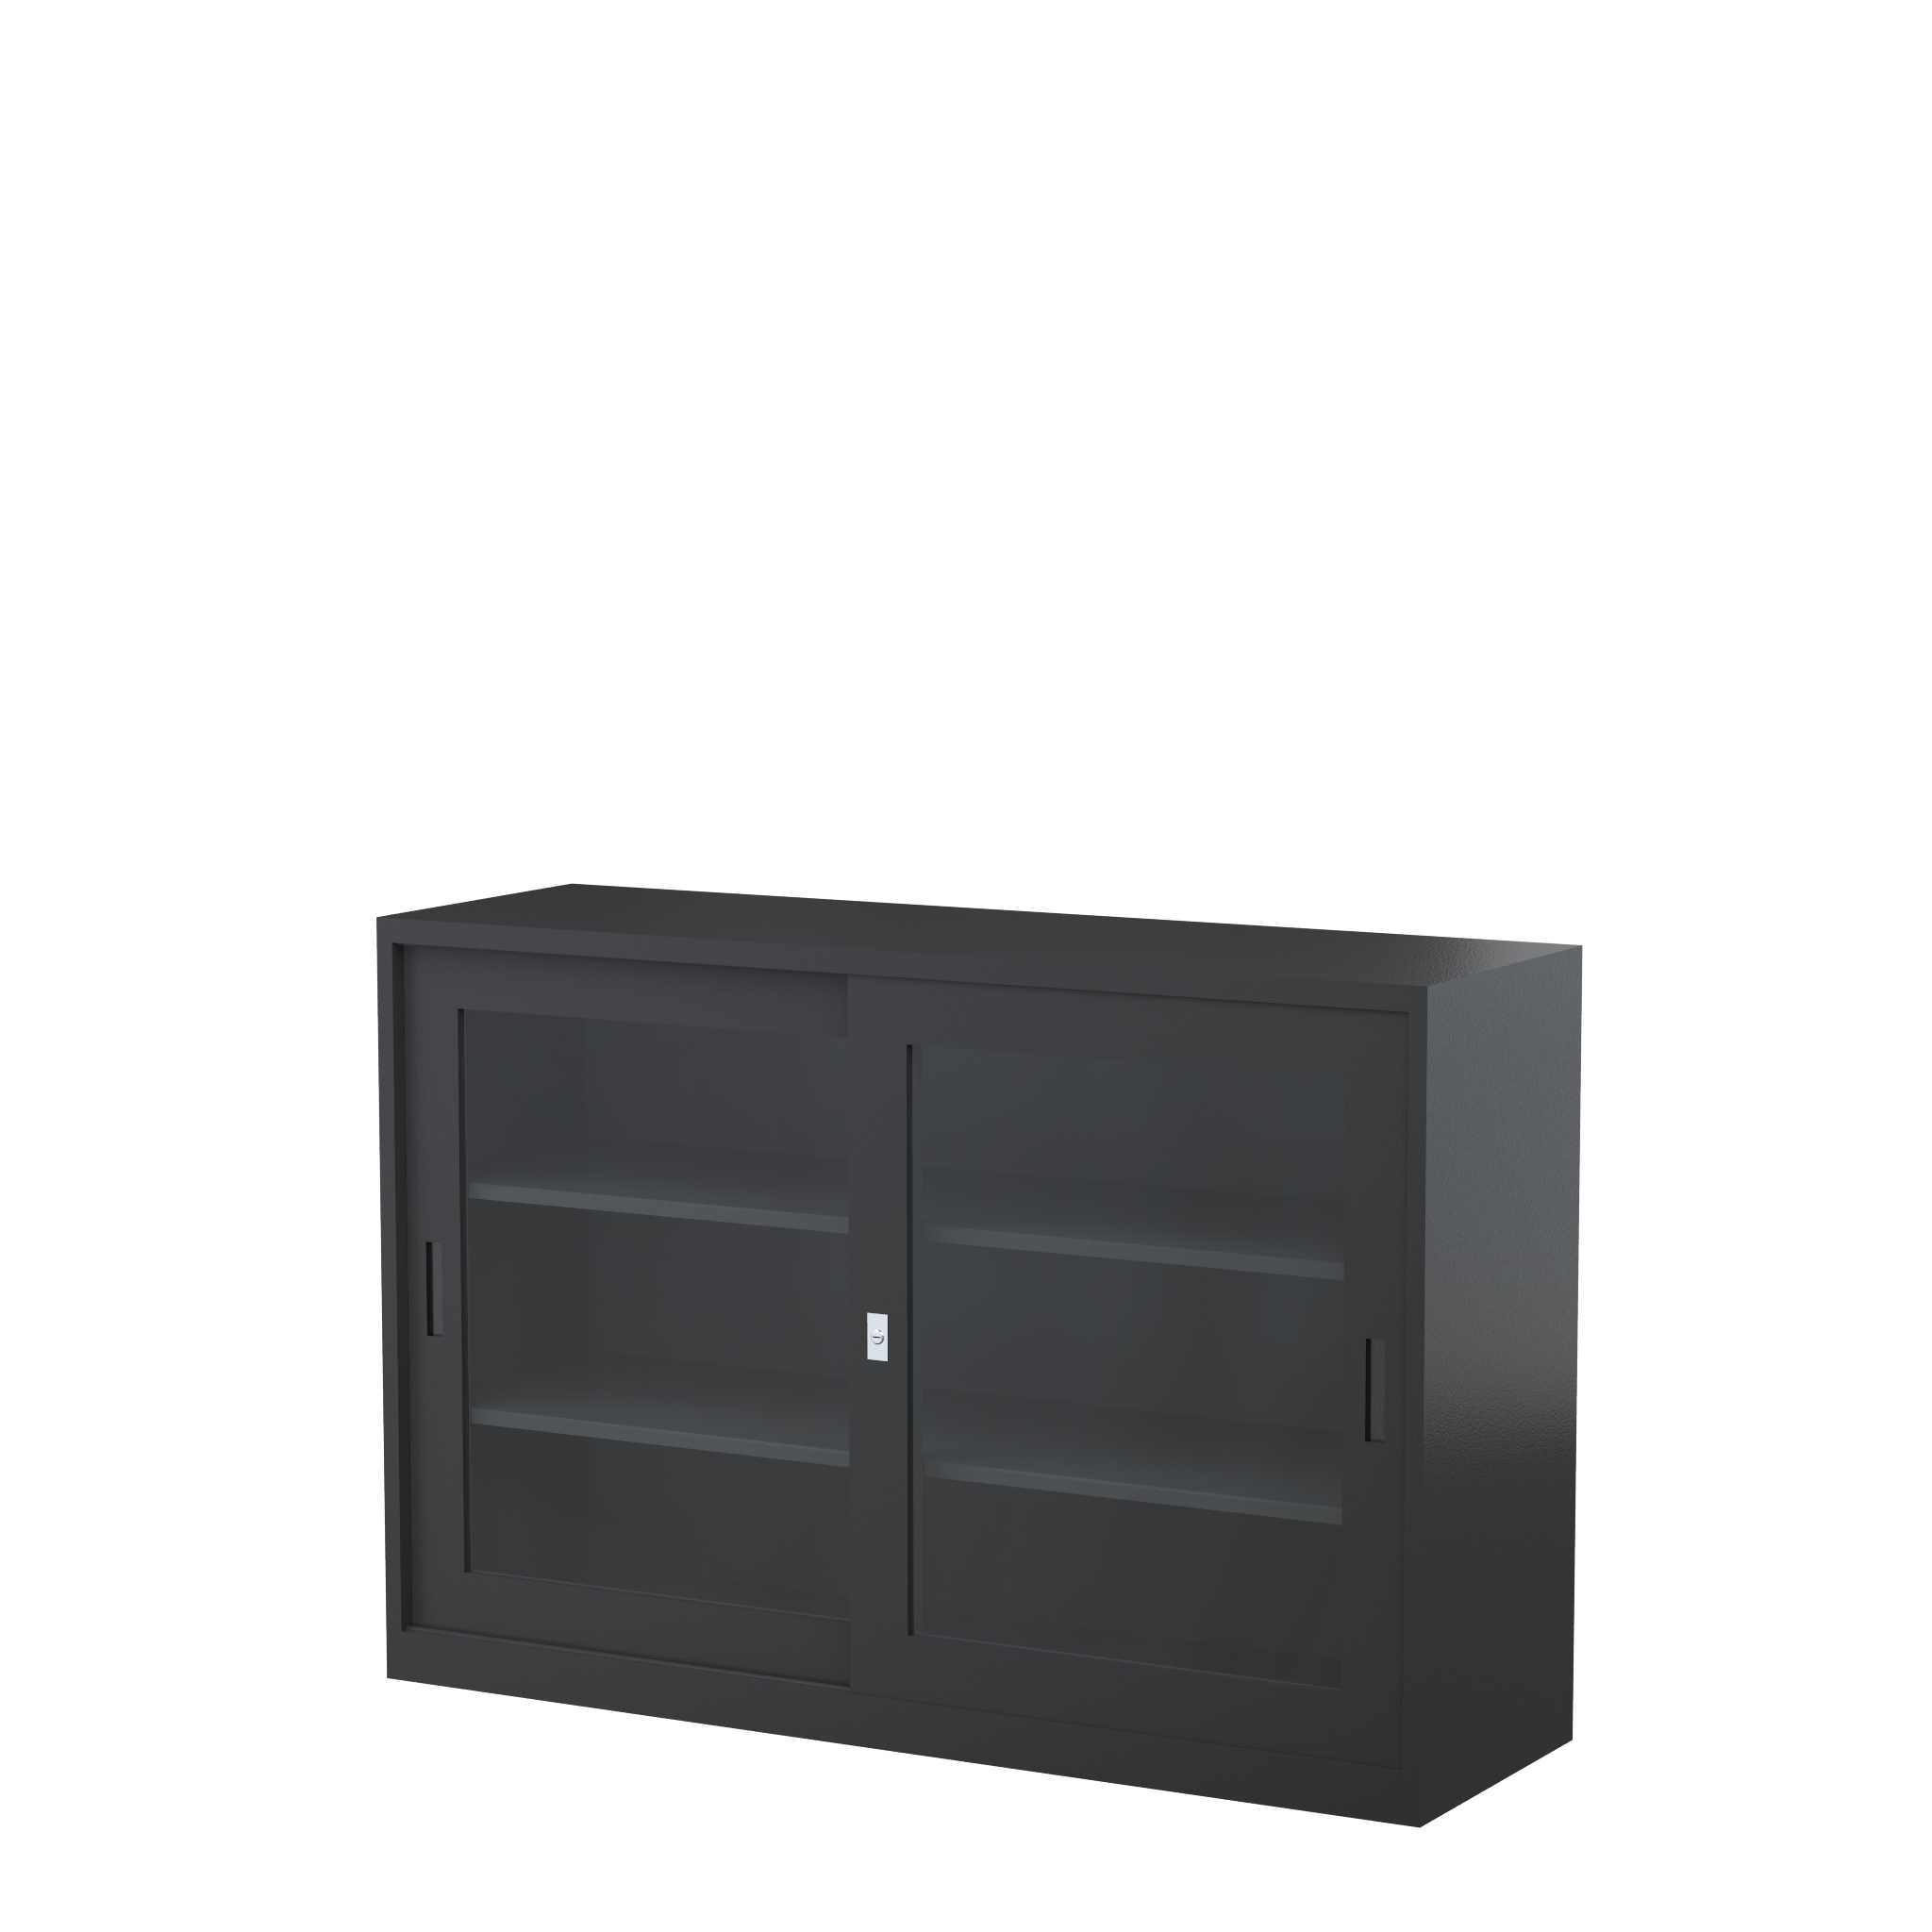 GD1015_1500 - STEELCO SG Cabinet 1015H x 1500W x 465D - 2 Shelves-GR.png